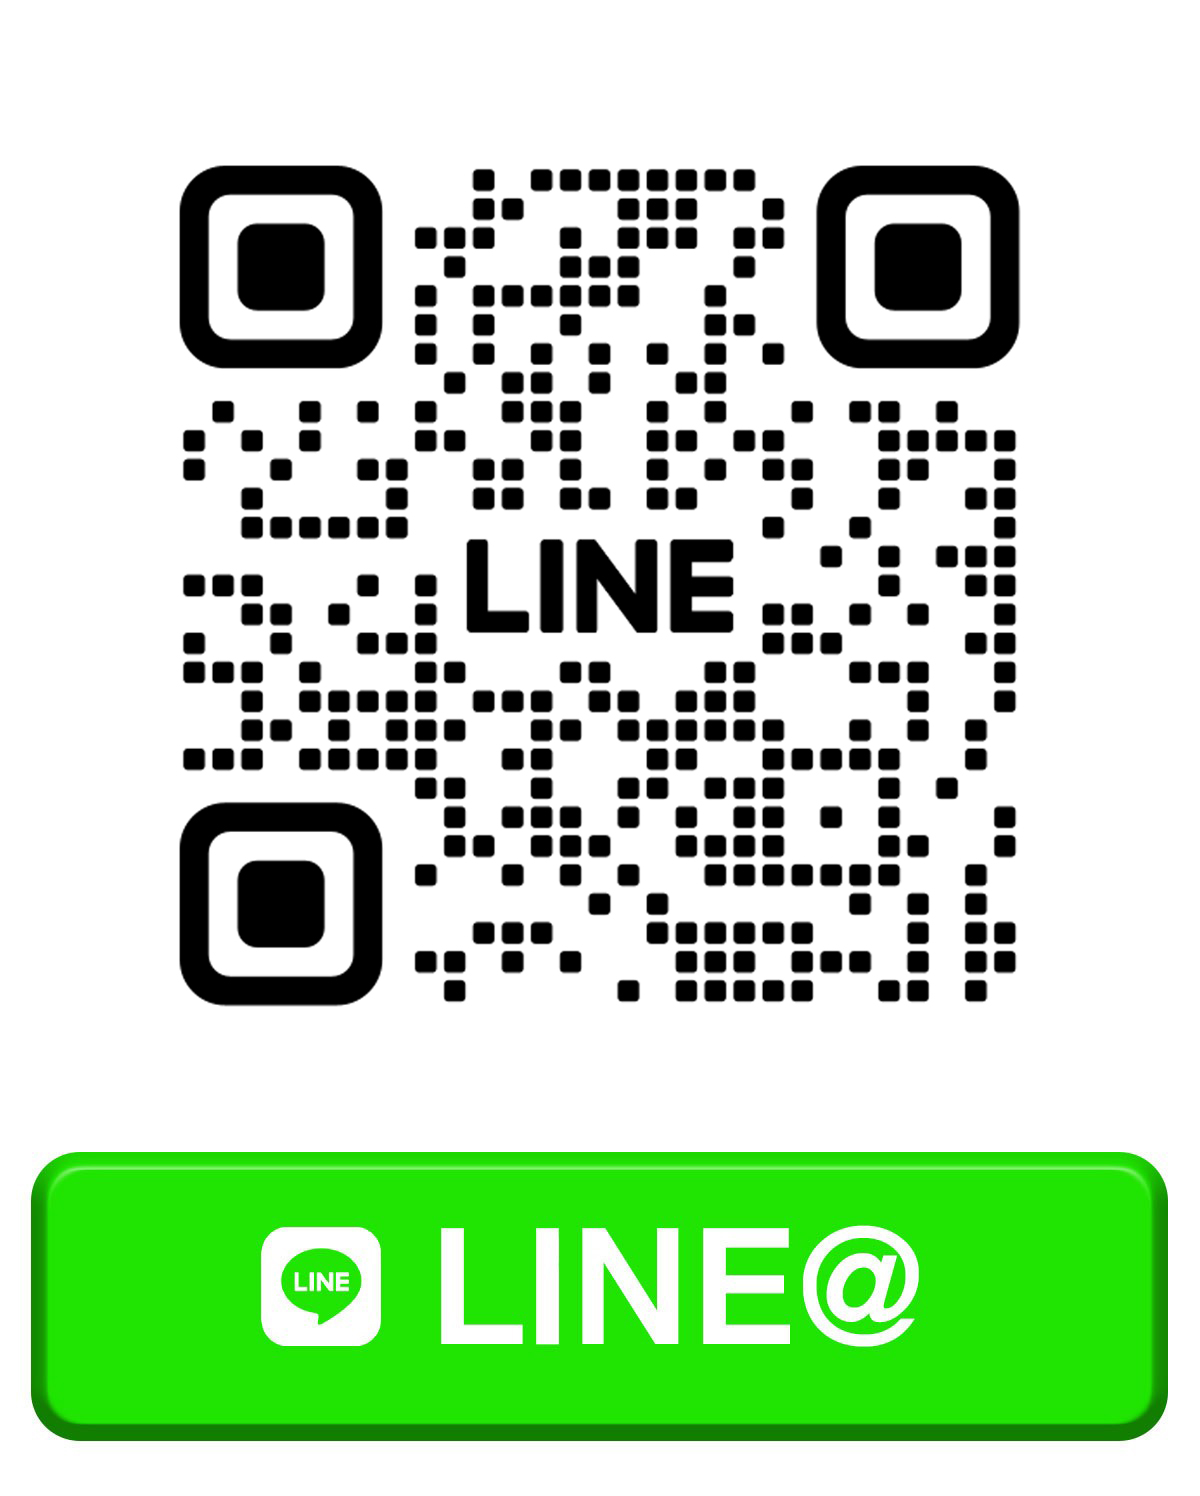 Contact us LINE image